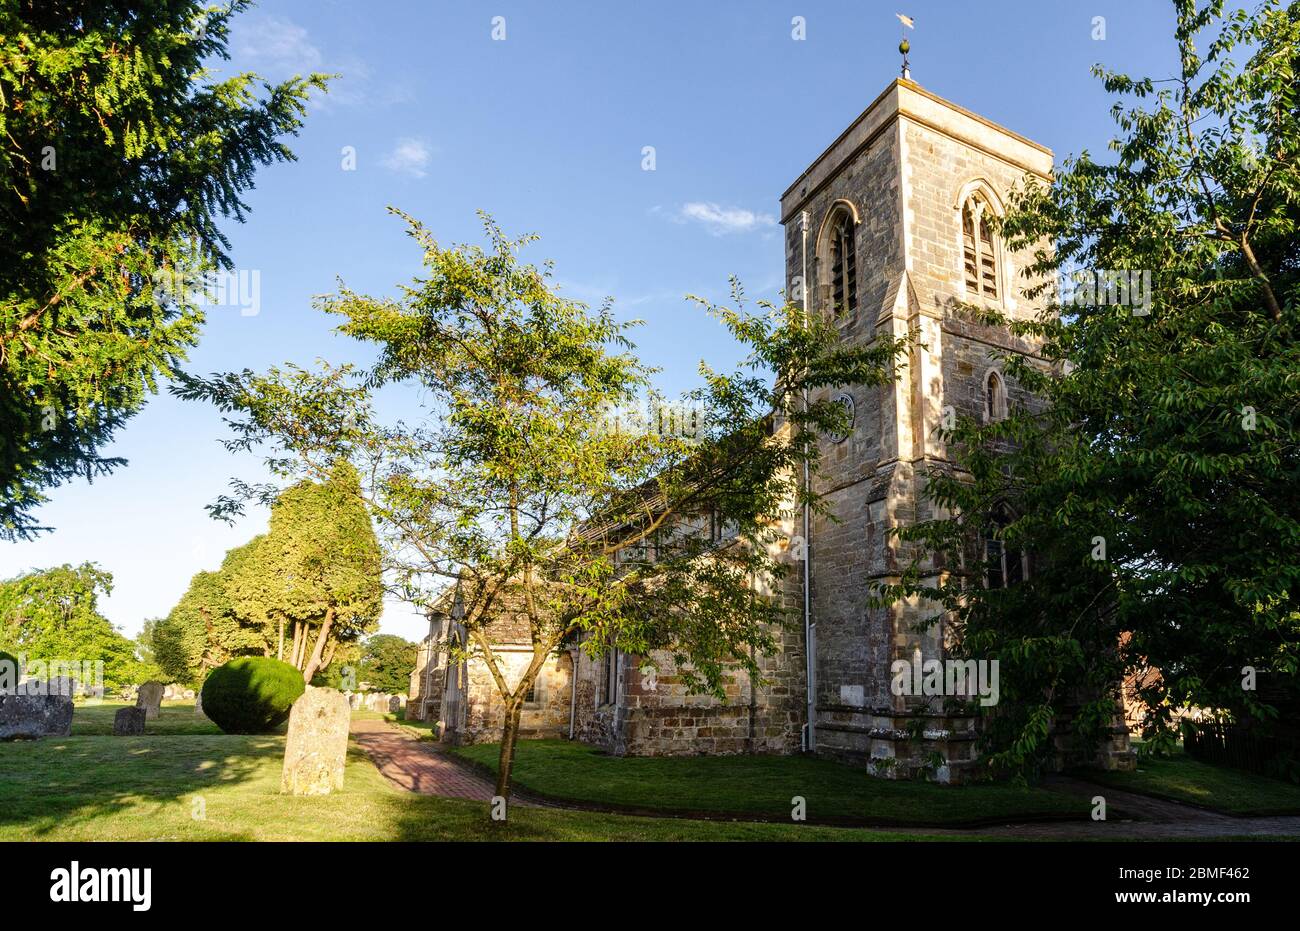 Uckfield, England, UK - August 21, 2013: Evening sun shines on the tower of Framfield Church in the Wealden district of East Sussex. Stock Photo